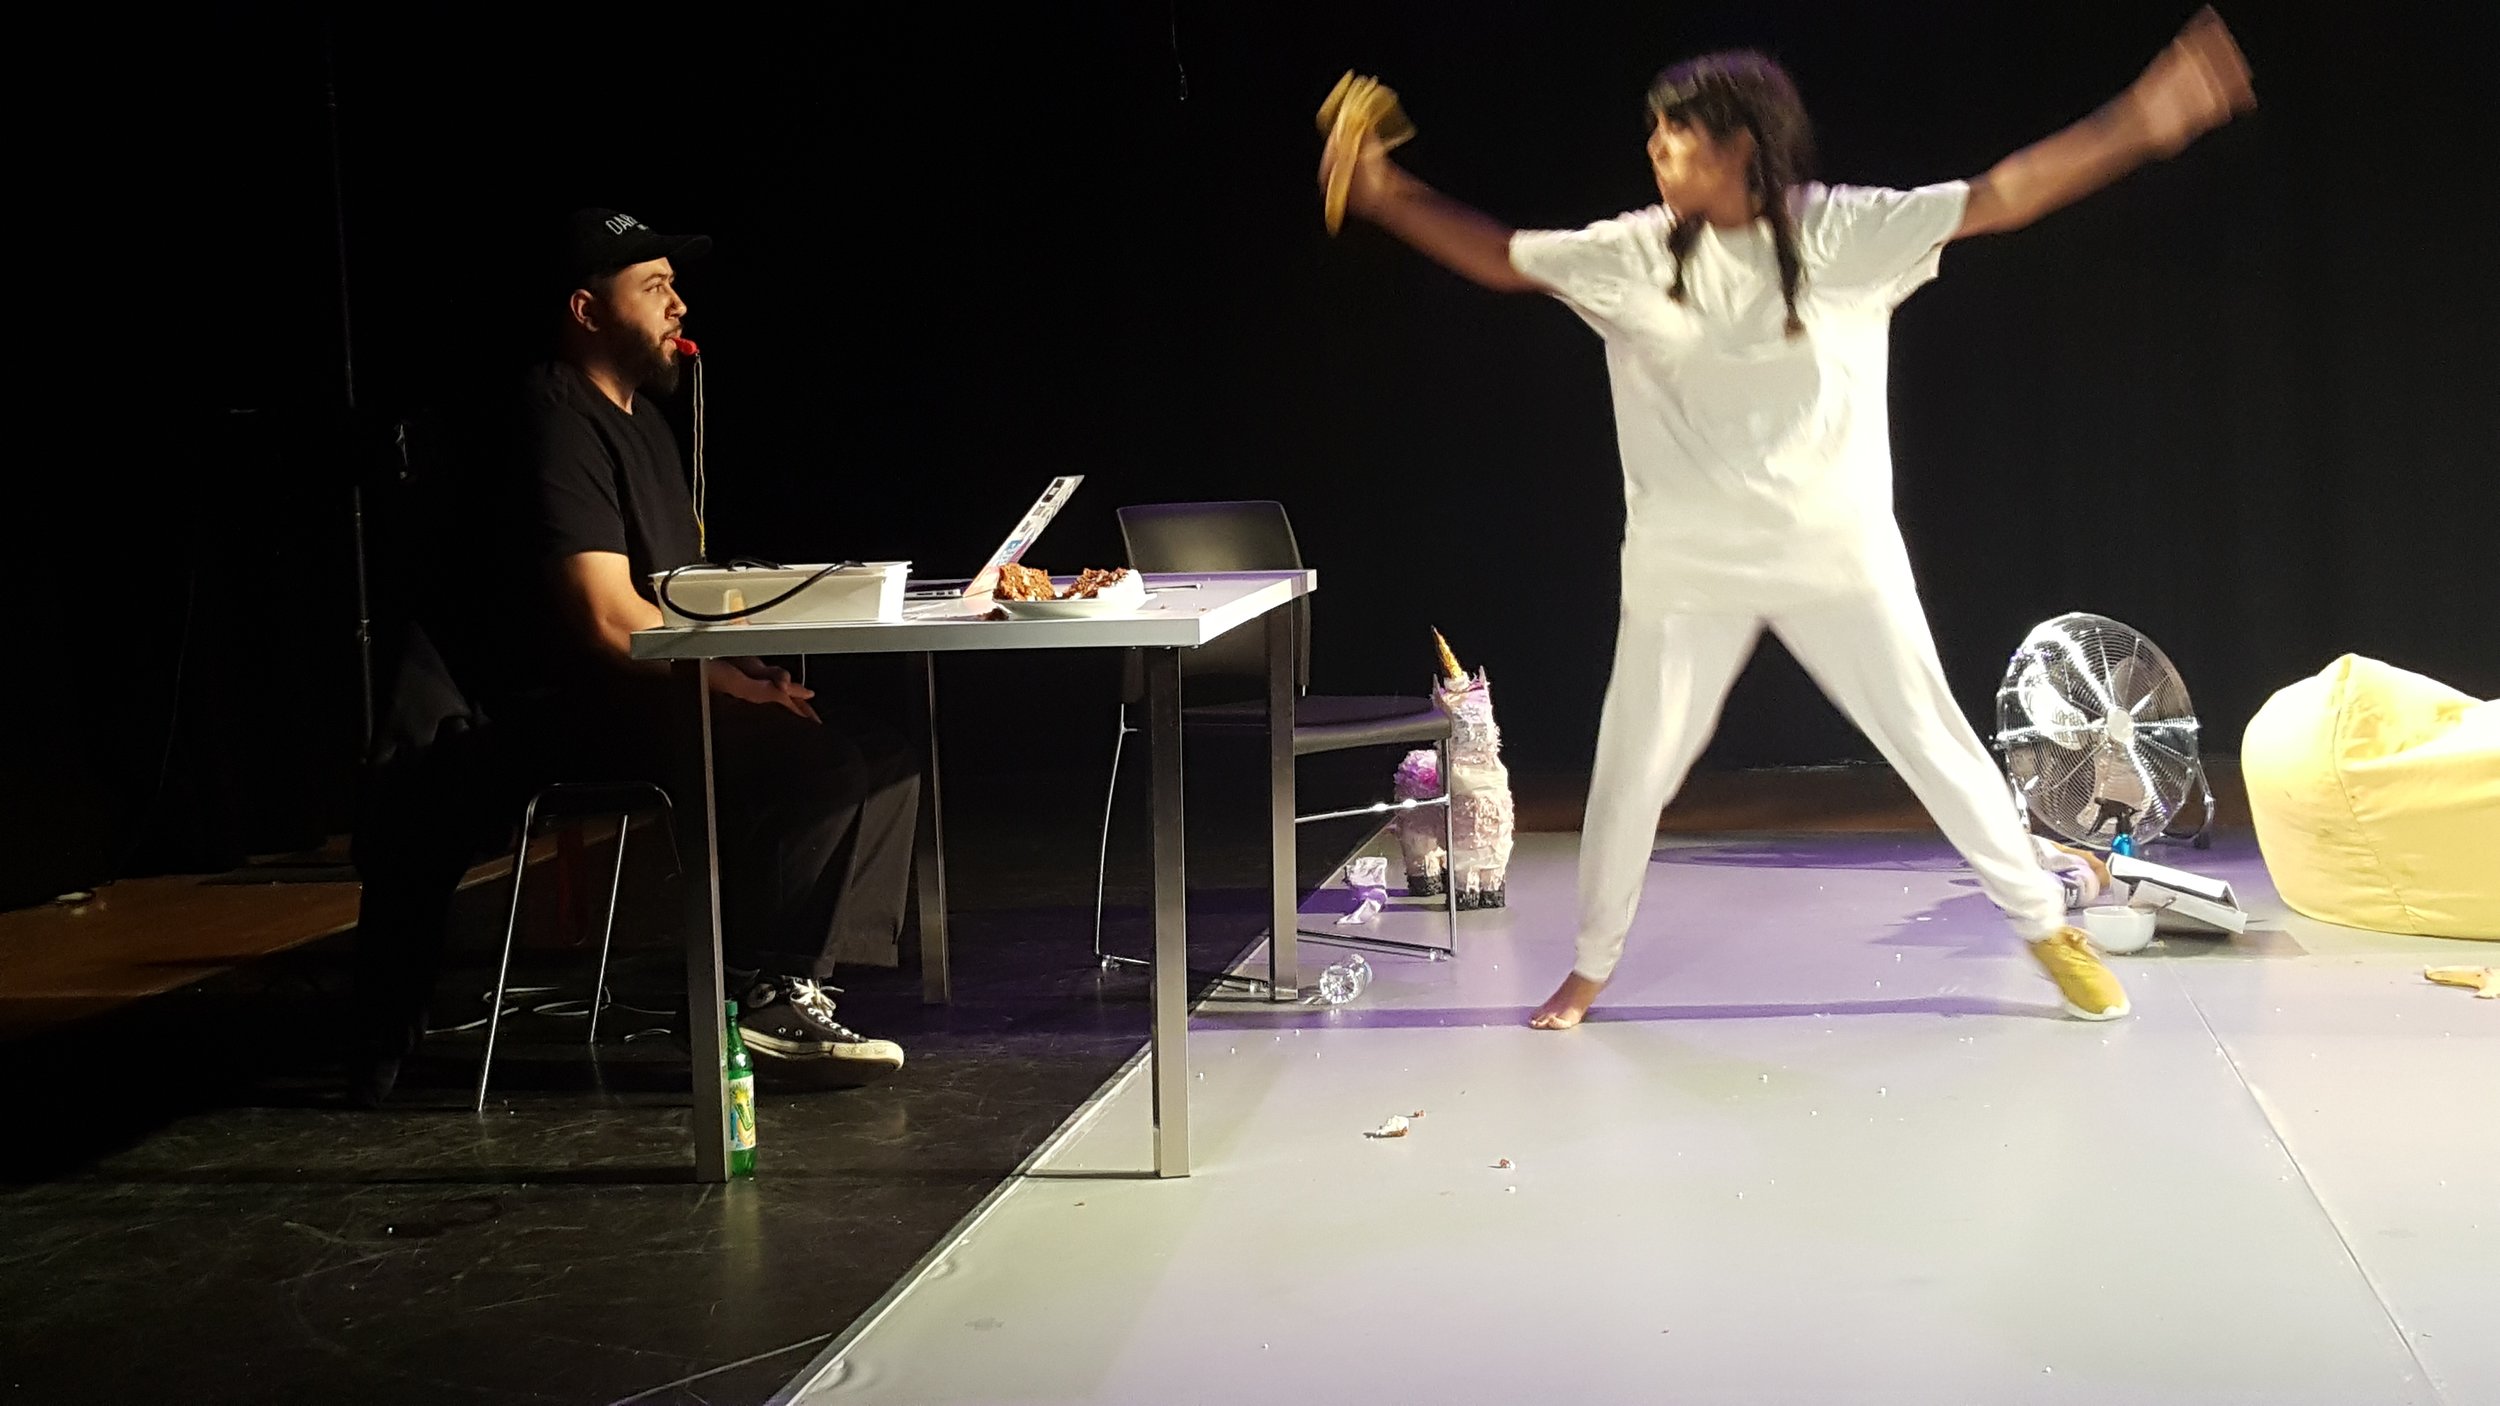  Image description: Man sits at a table on stage with a whsitle in mouth looking at a woman who is throwing a banana towards him.  